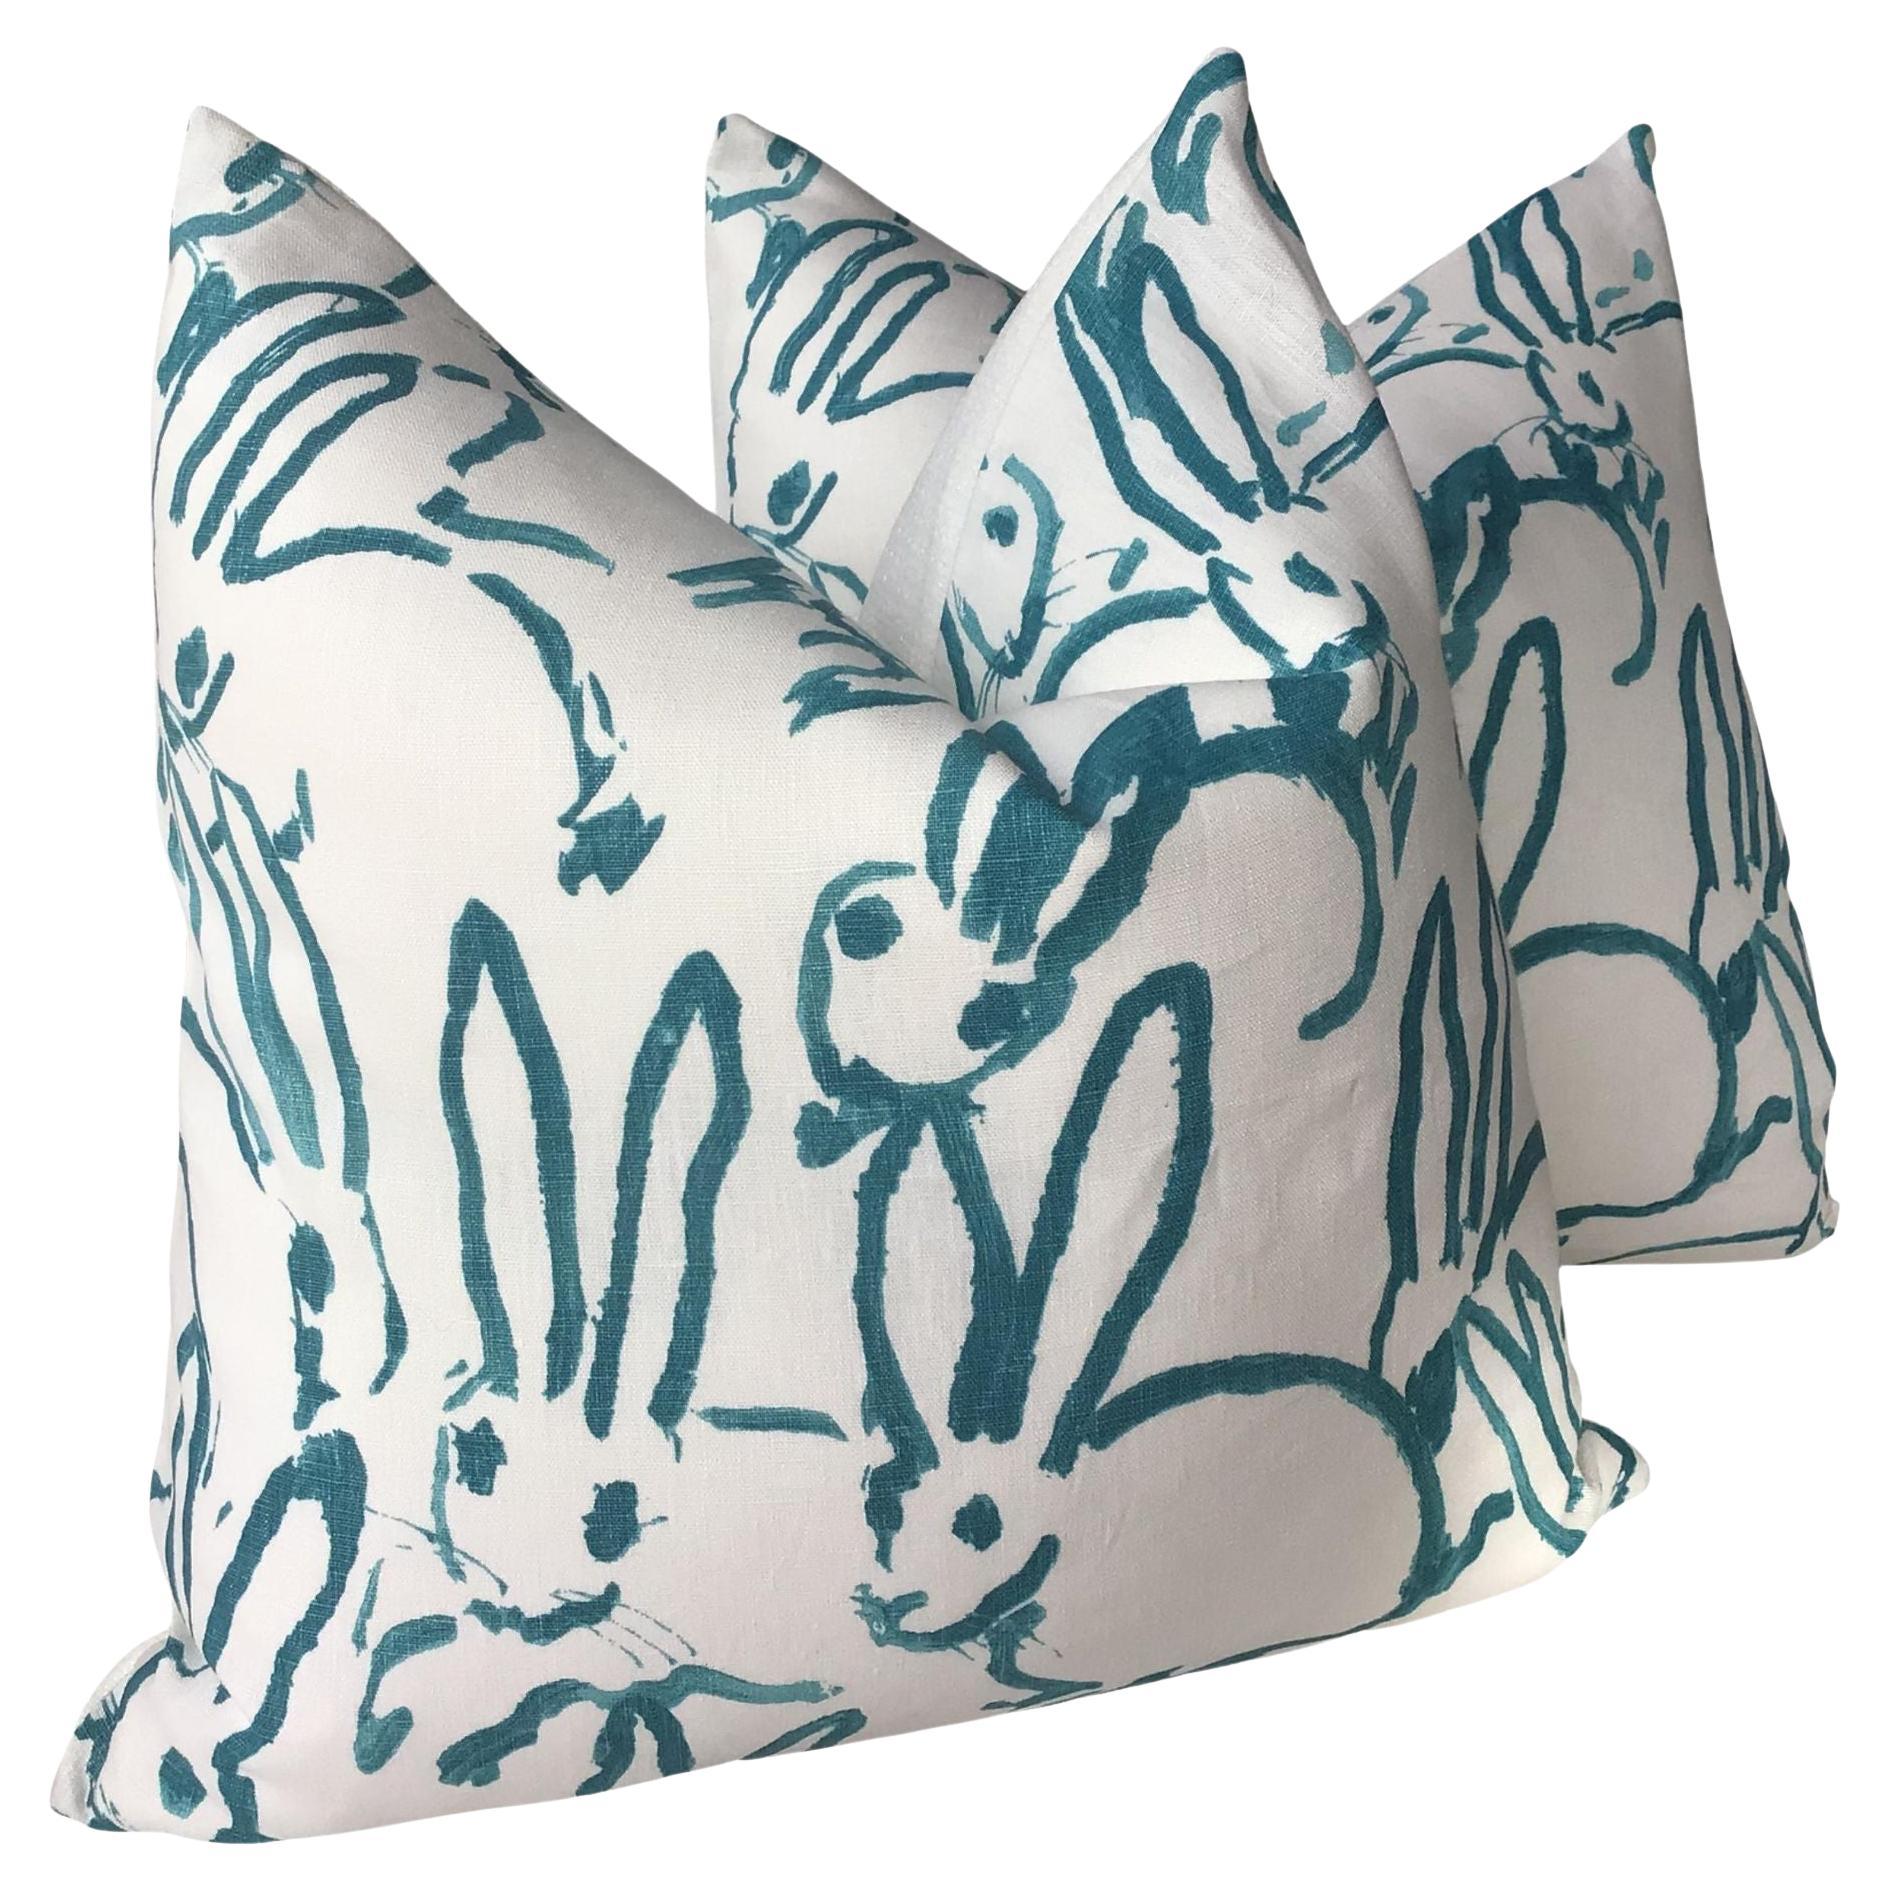 Hunt Slonen “Bunny Hutch” in Aqua 22” Down Filled Pillows - a Pair For Sale